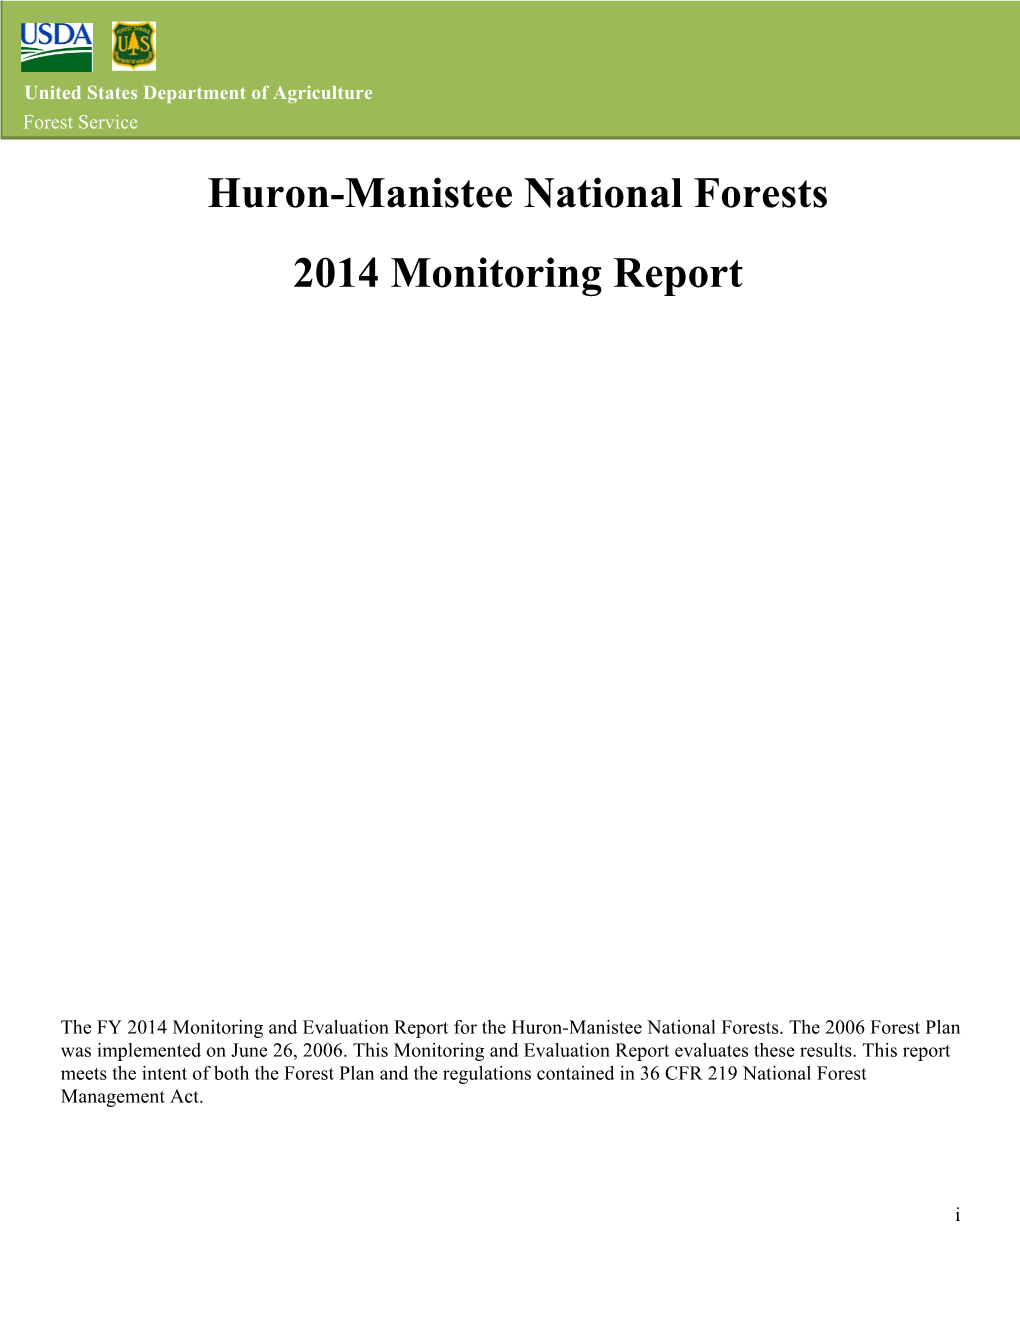 Huron-Manistee National Forests 2014 Monitoring Report